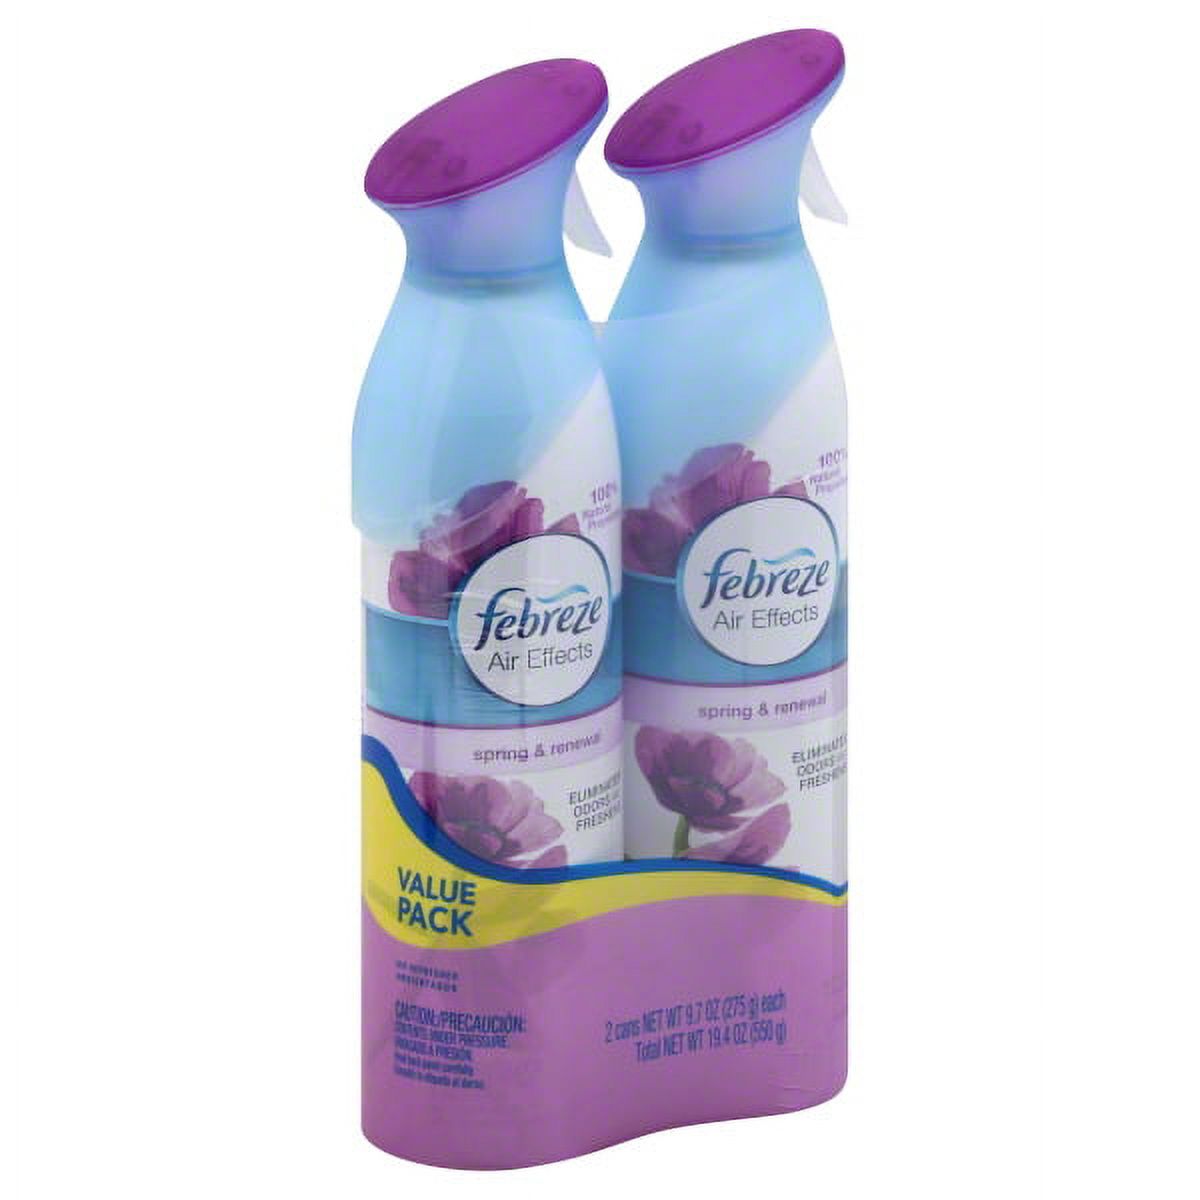 Febreze Air Effects Air Refresher, Spring & Renewal, 9.7 Oz, 2 Ct - image 1 of 4